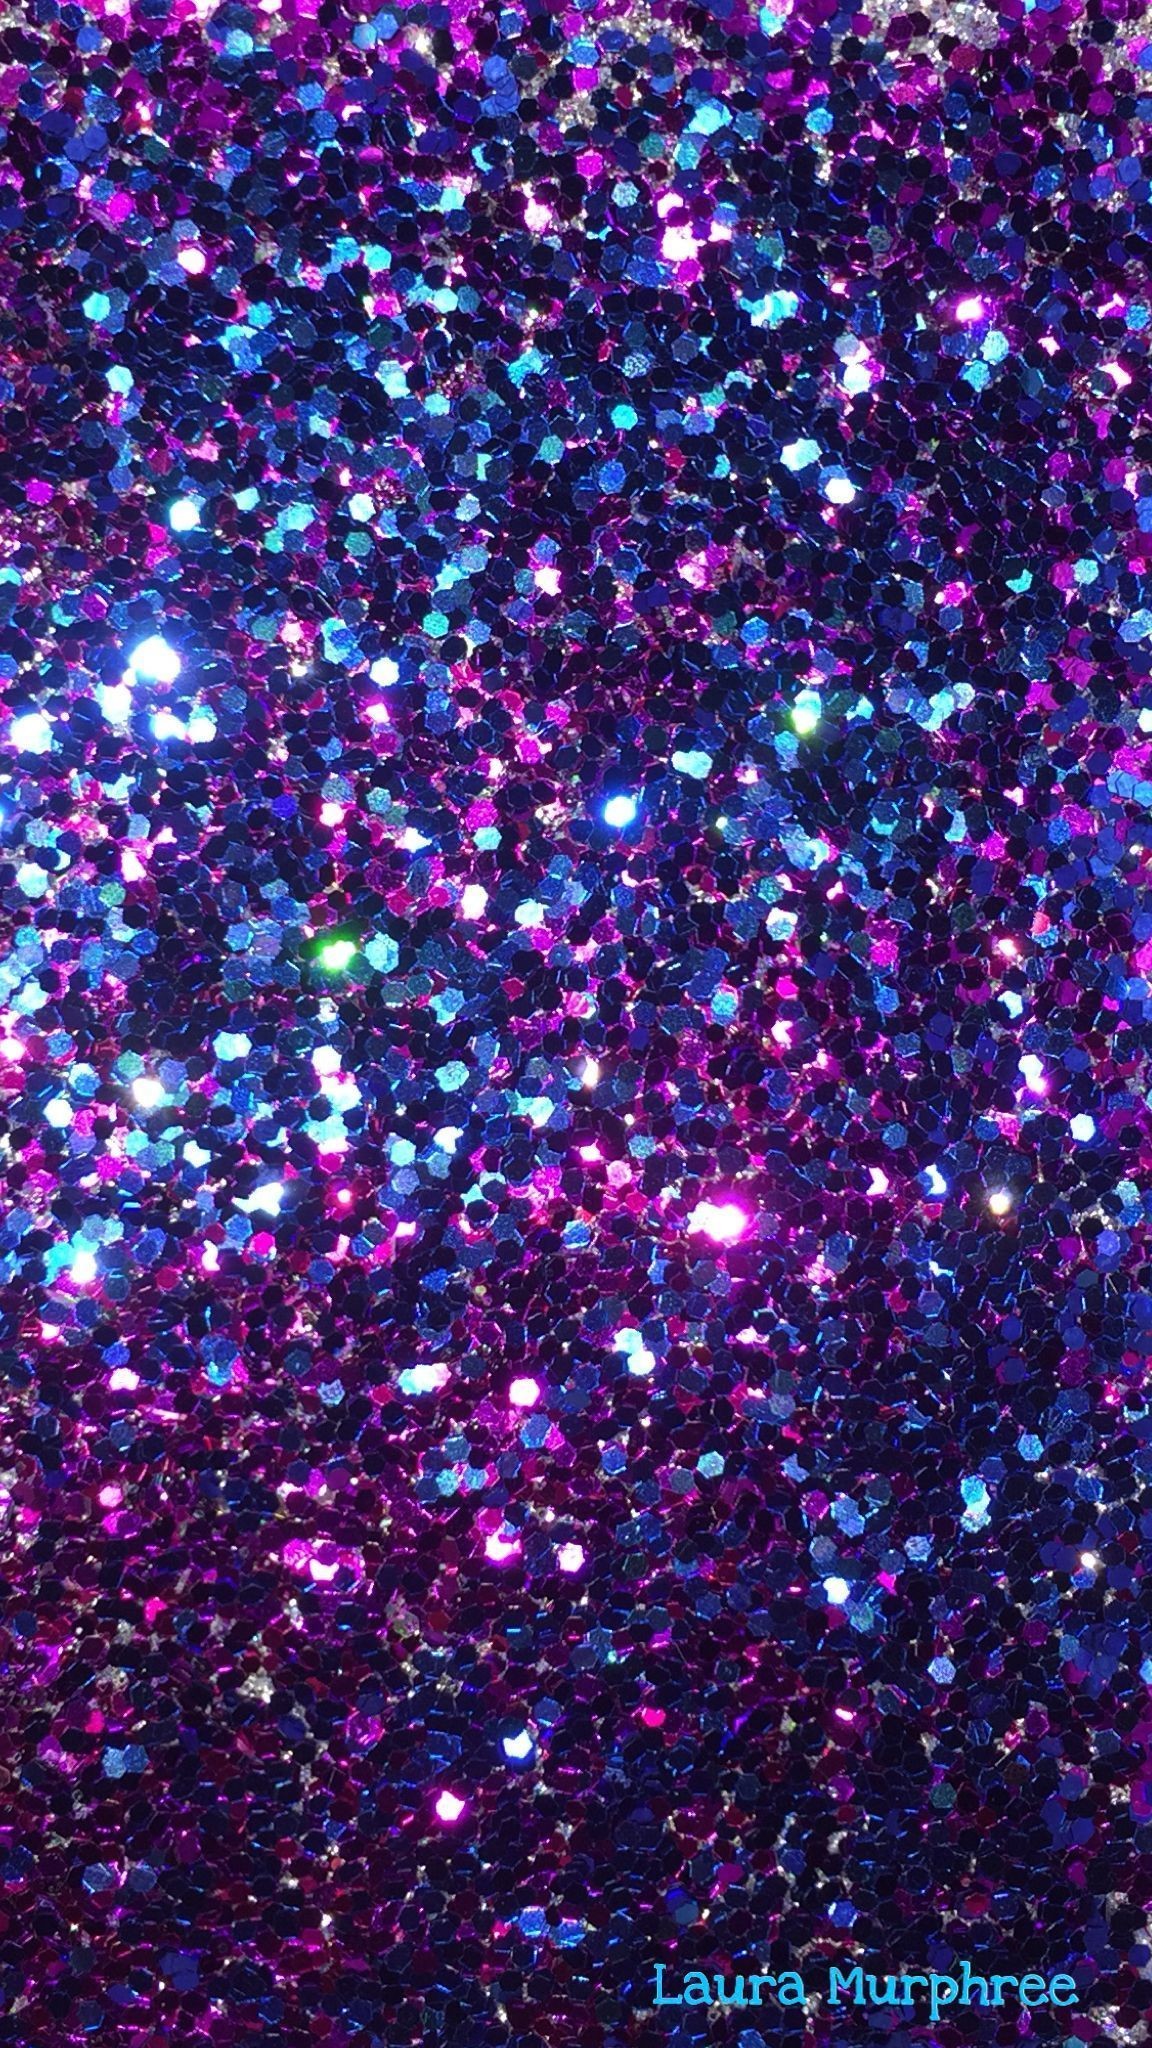 Images of Glitter Background (40+ pictures)